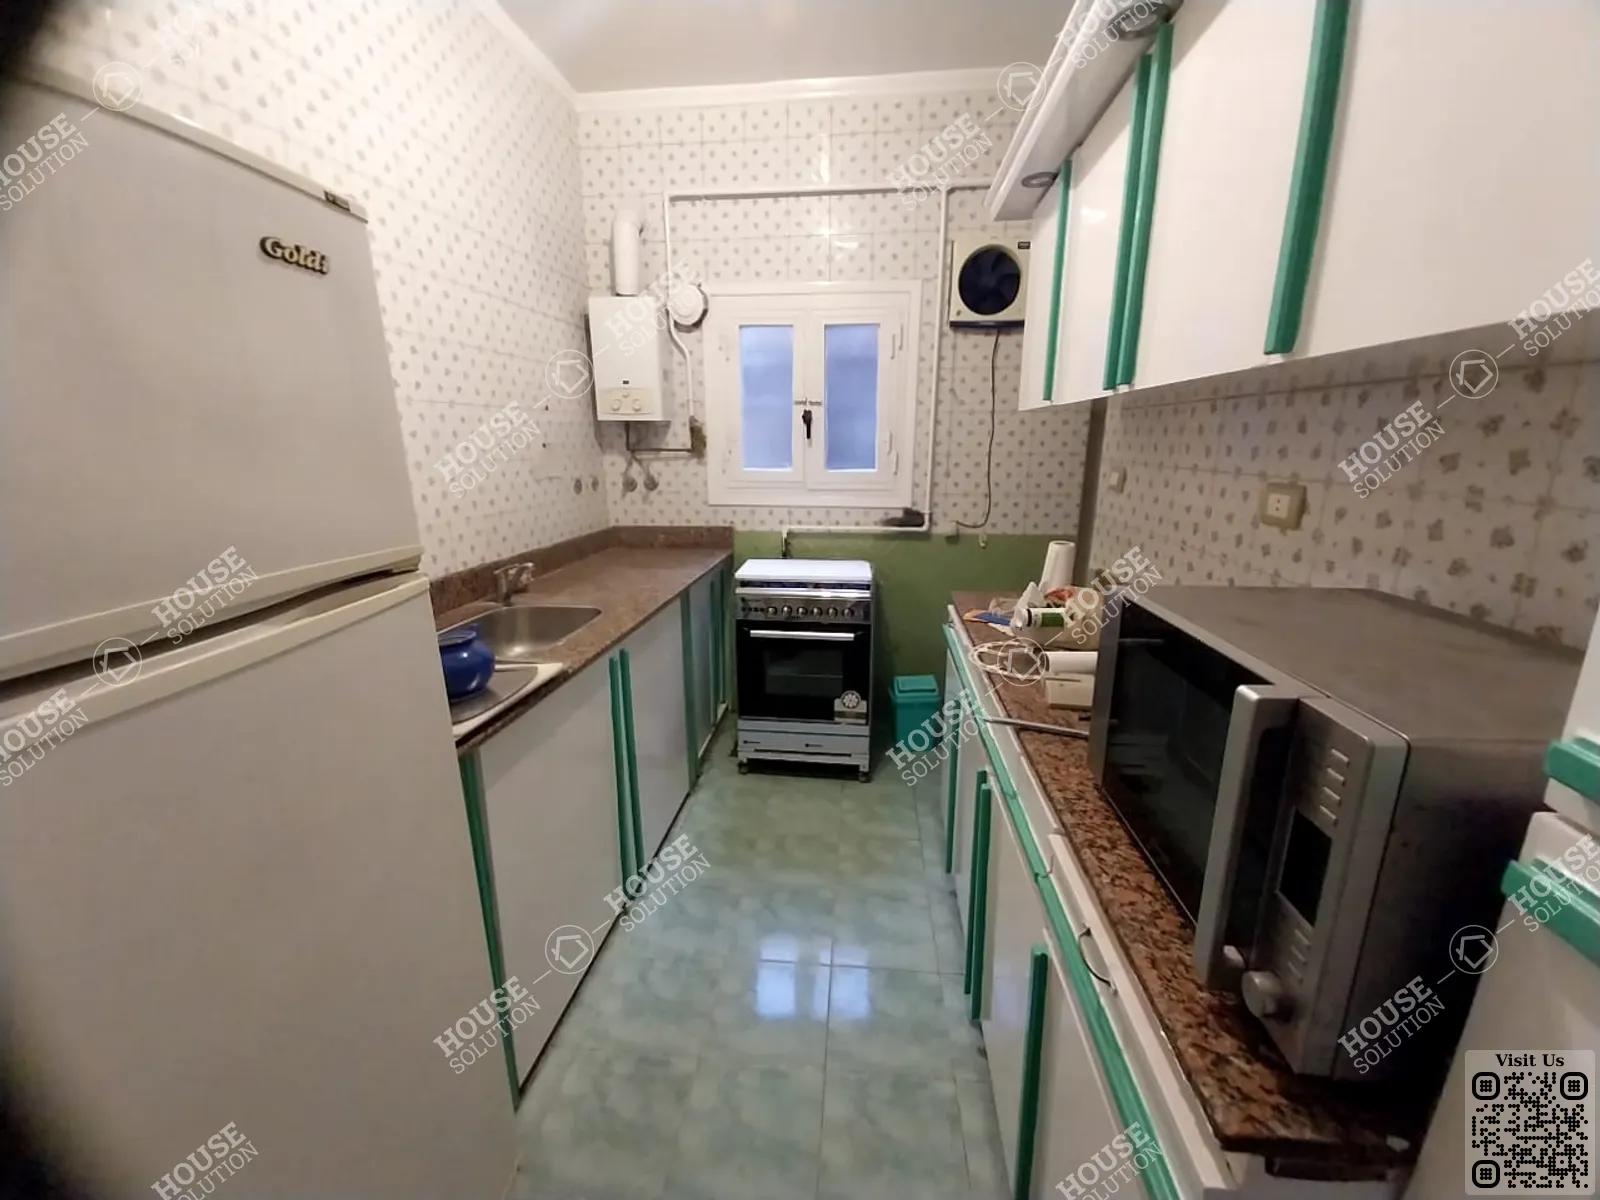 KITCHEN  @ Apartments For Rent In Maadi Maadi Sarayat Area: 125 m² consists of 2 Bedrooms 2 Bathrooms Furnished 5 stars #5837-2